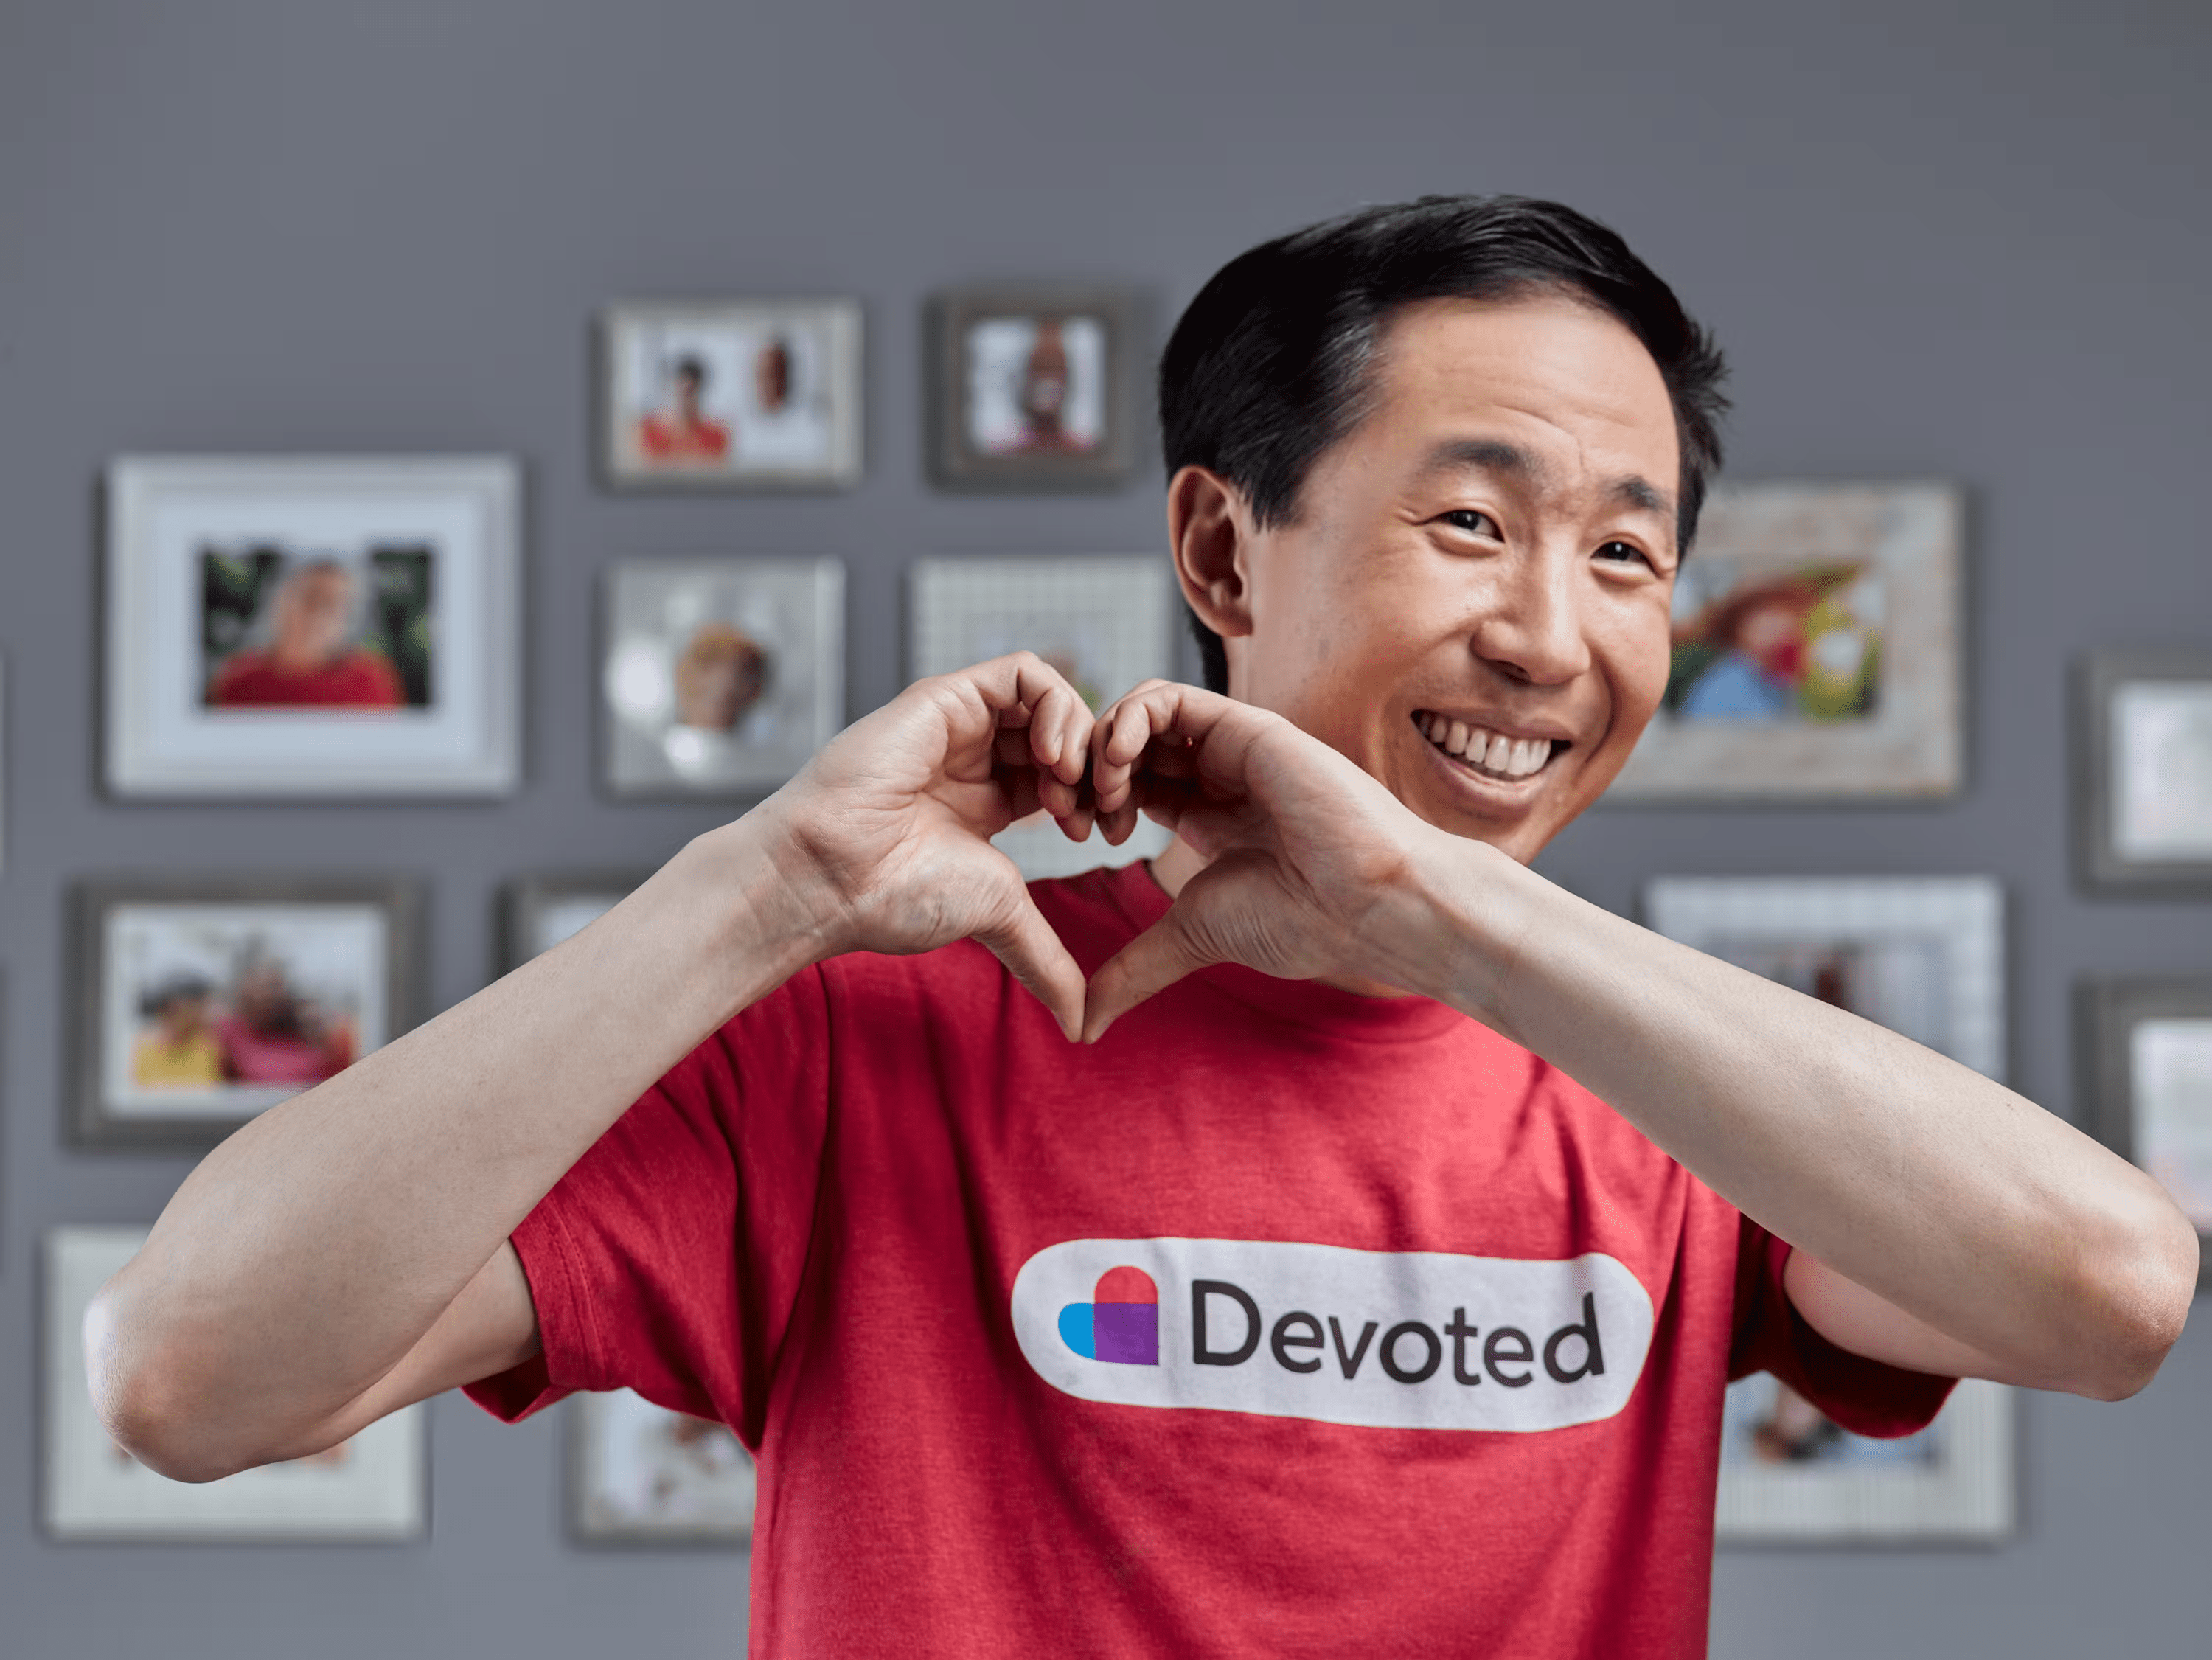 Devoted Health Secures $175M to Expand Medicare Advantage Plans for Seniors